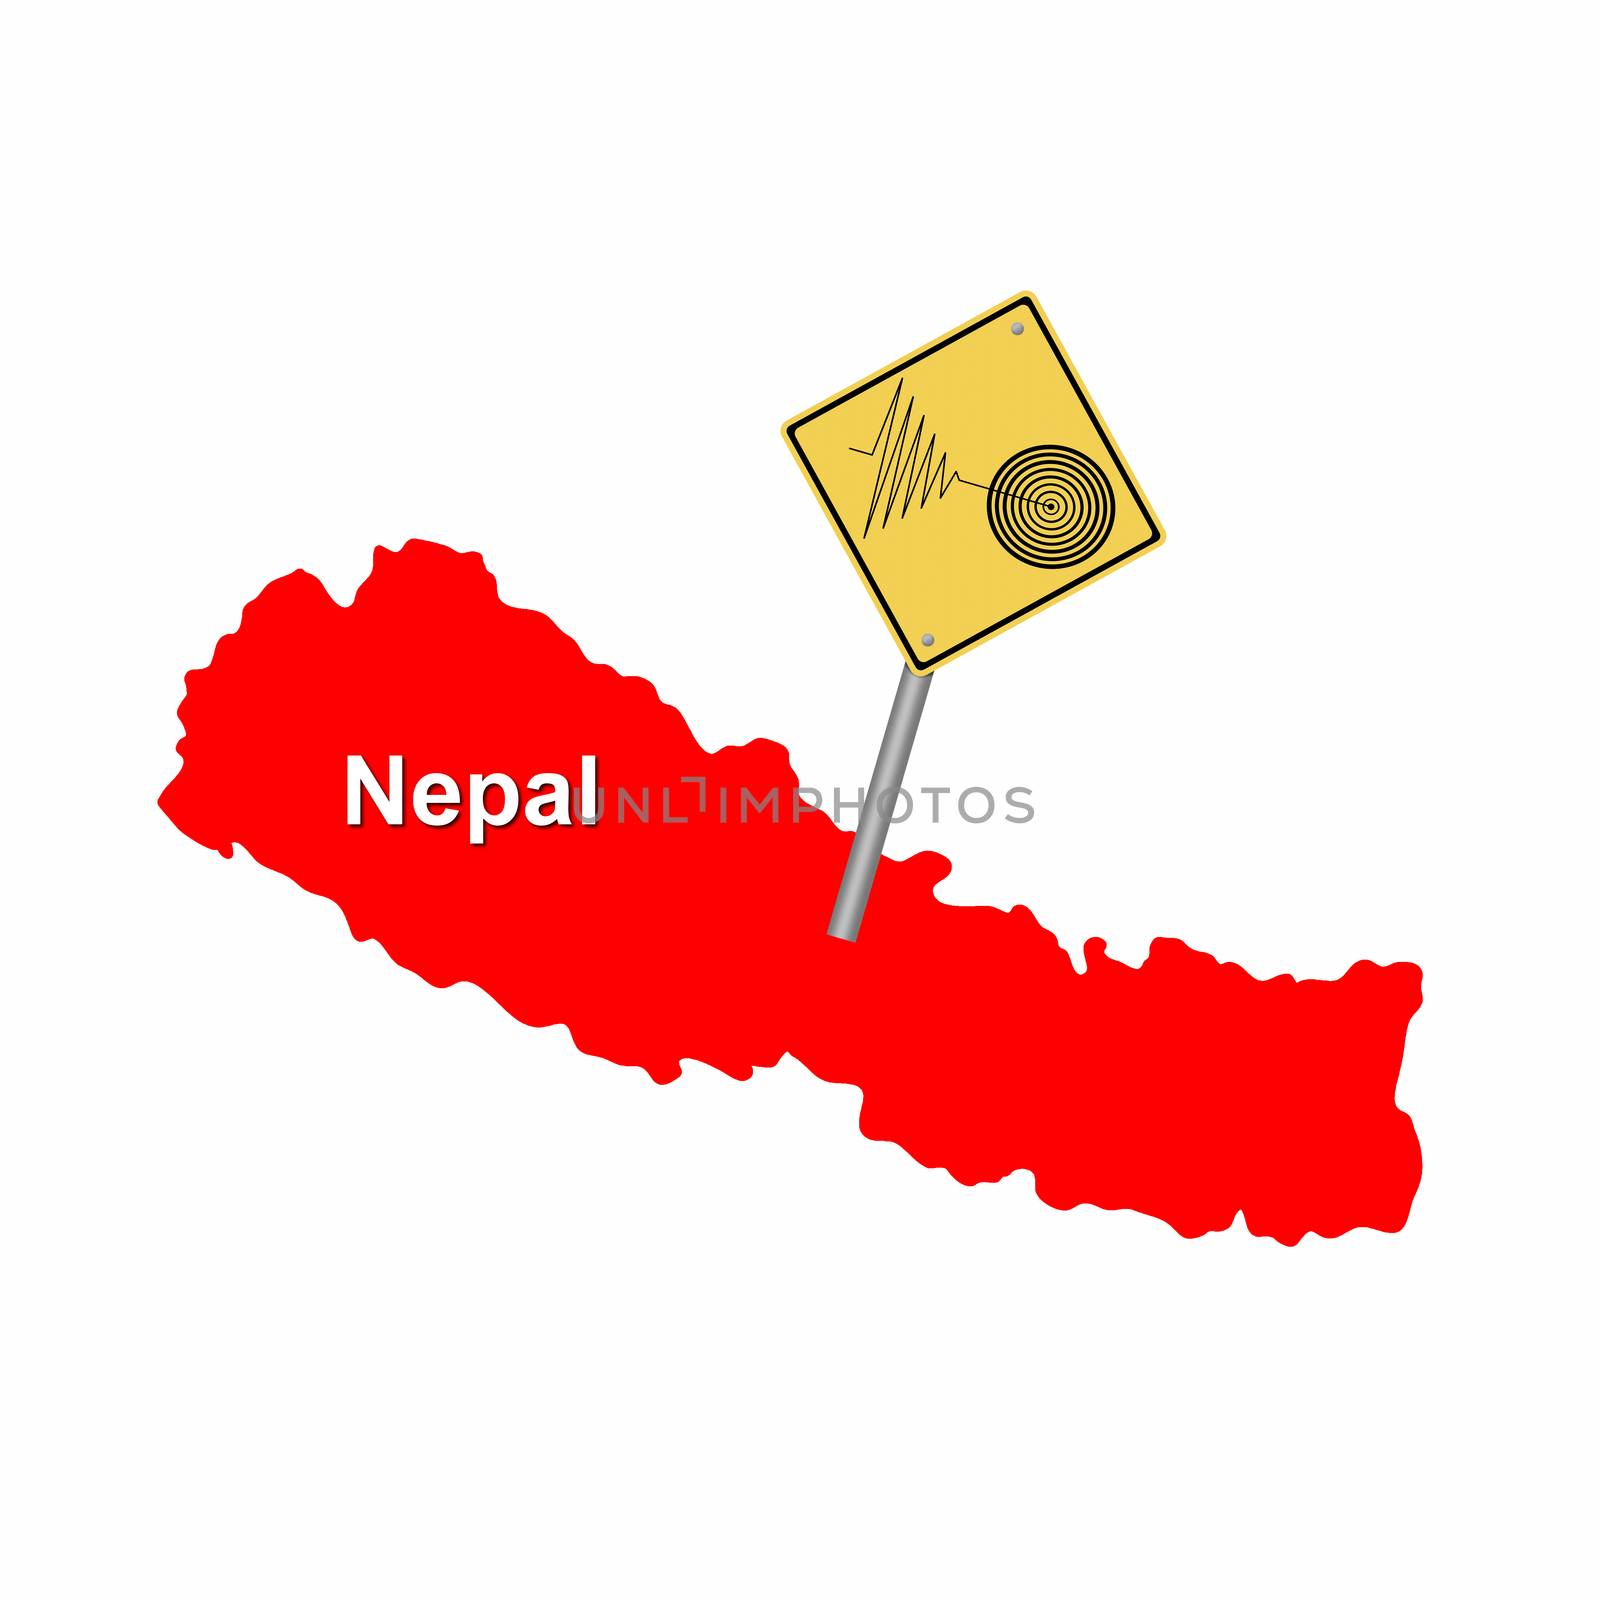 Red map of Nepal with a tremore warning sign.